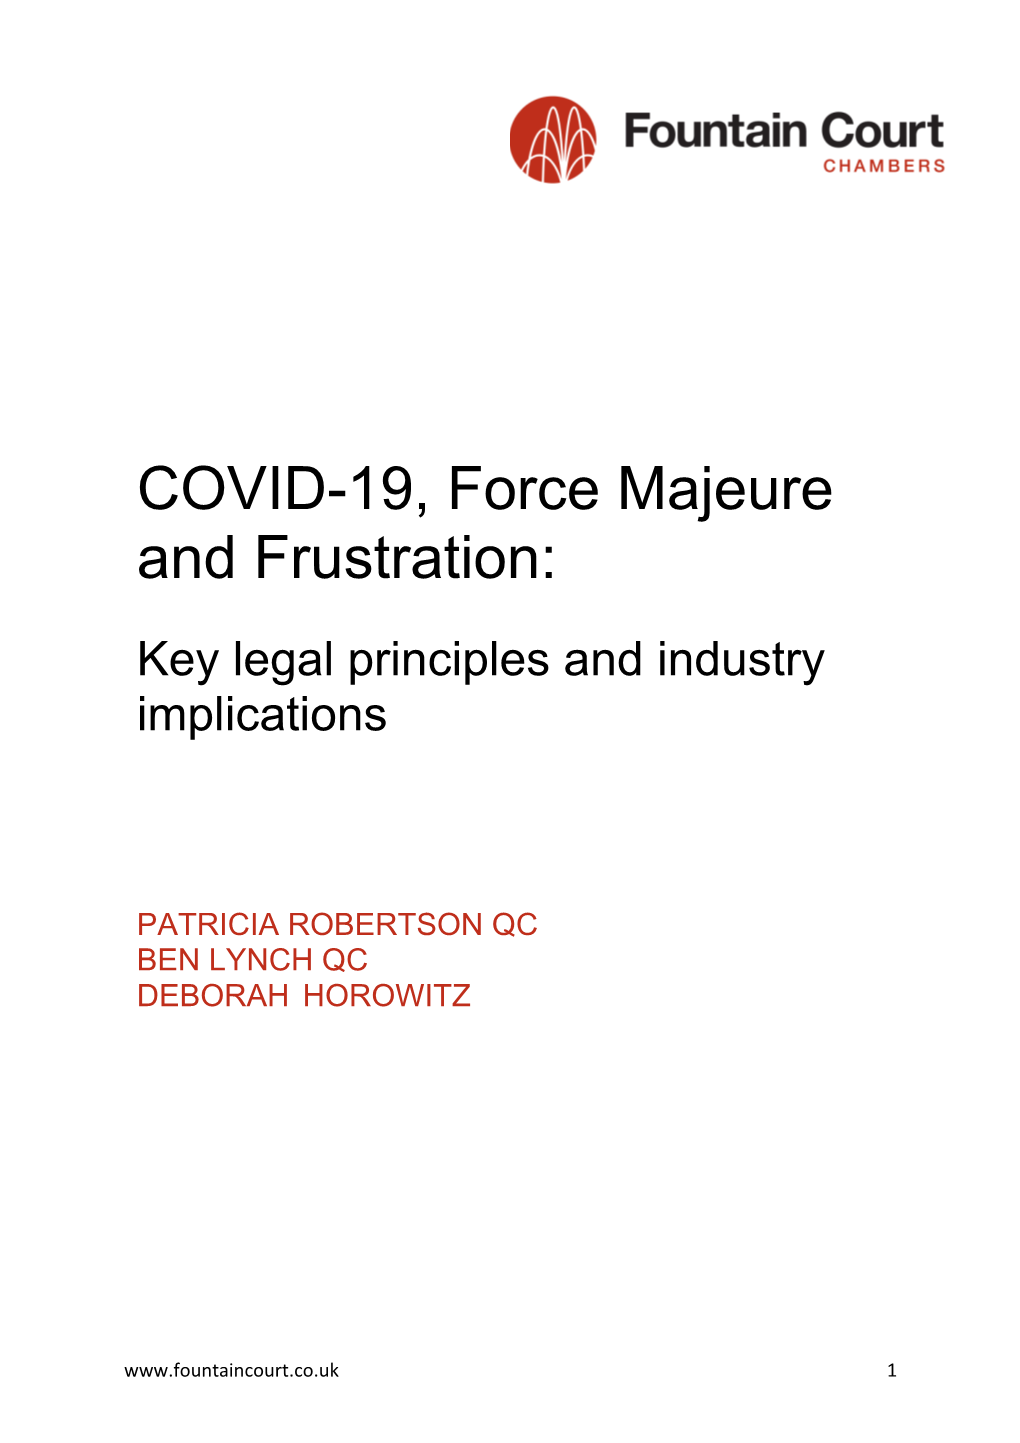 COVID-19, Force Majeure and Frustration